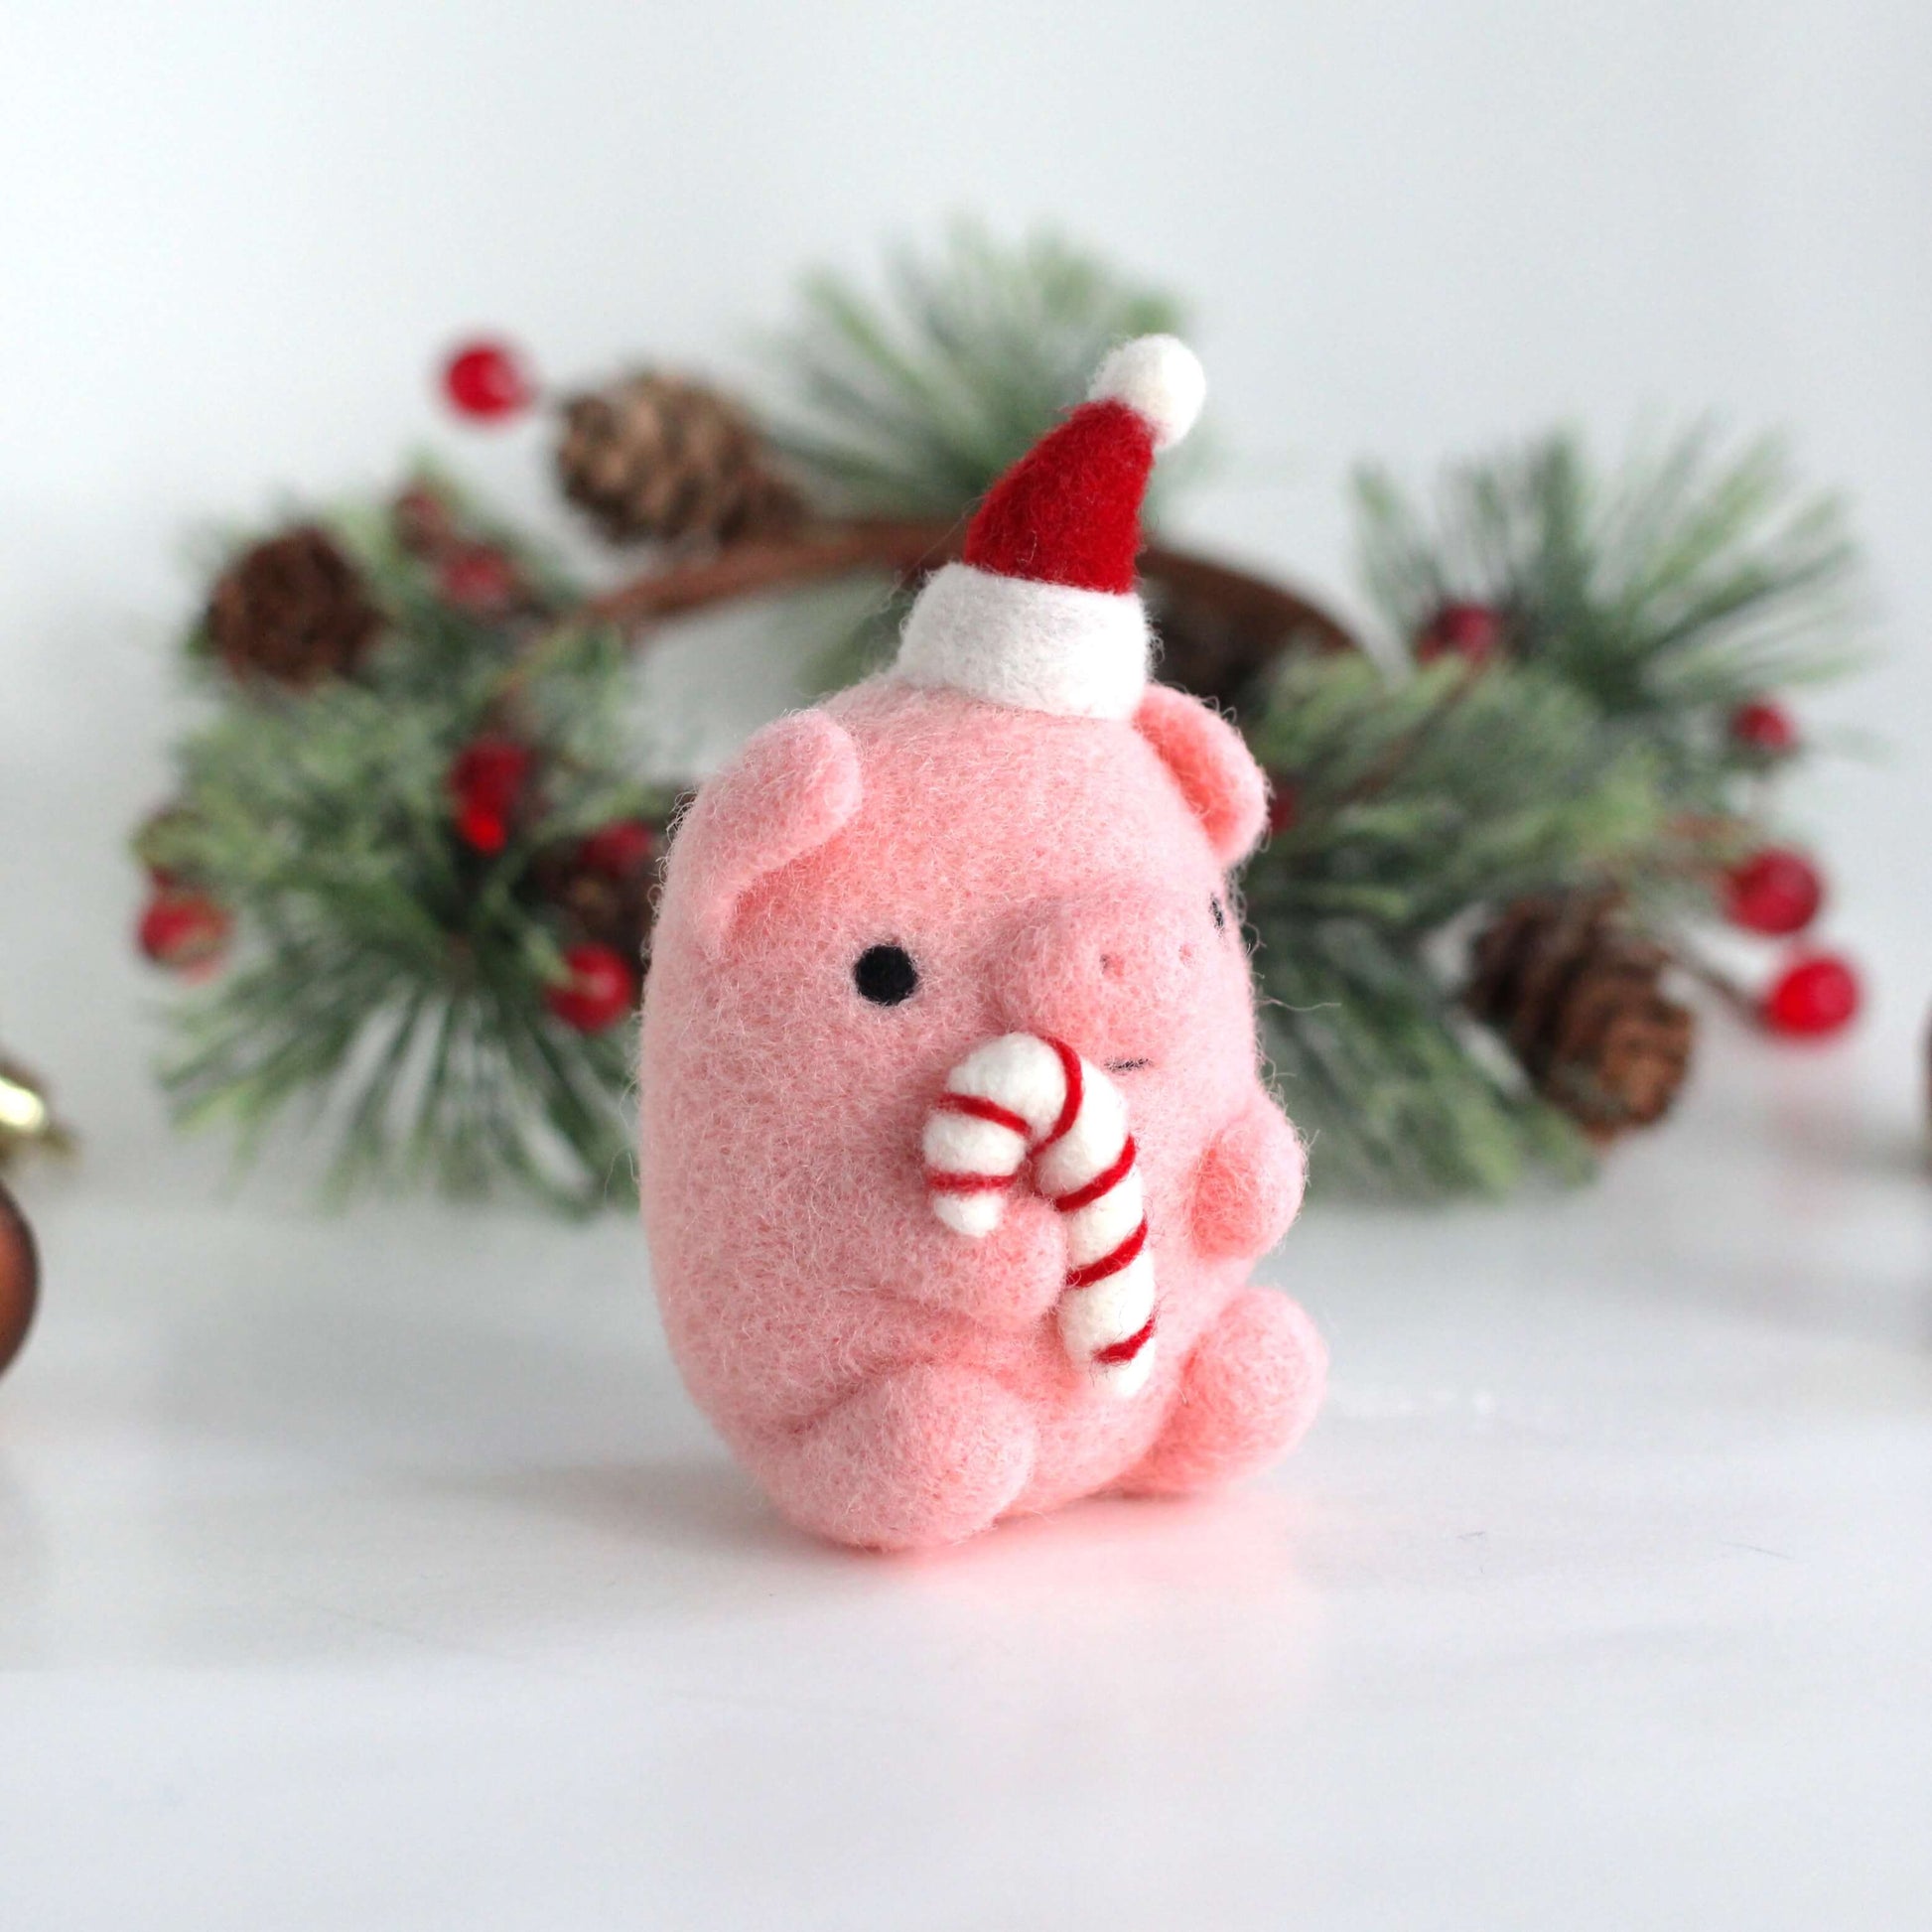 Needle Felted Pig holding Candy Cane by Wild Whimsy Woolies